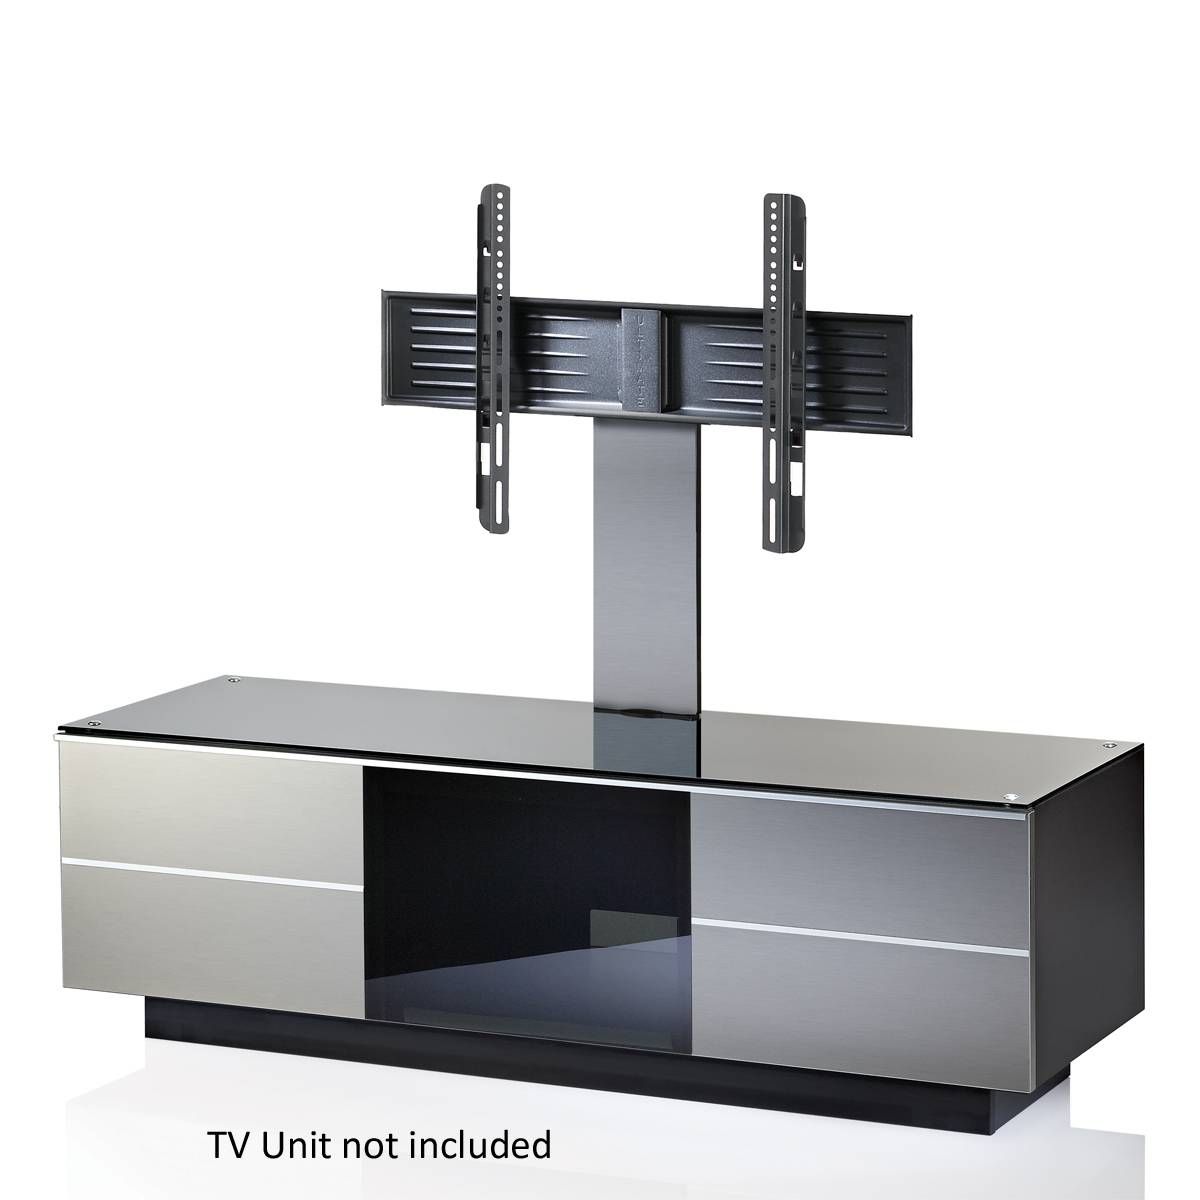 Inox G B 80 Inx Cantilever Tv Bracket,ukcf Ultimate,,uk Cf Throughout Cantilever Tv Stands (View 11 of 15)